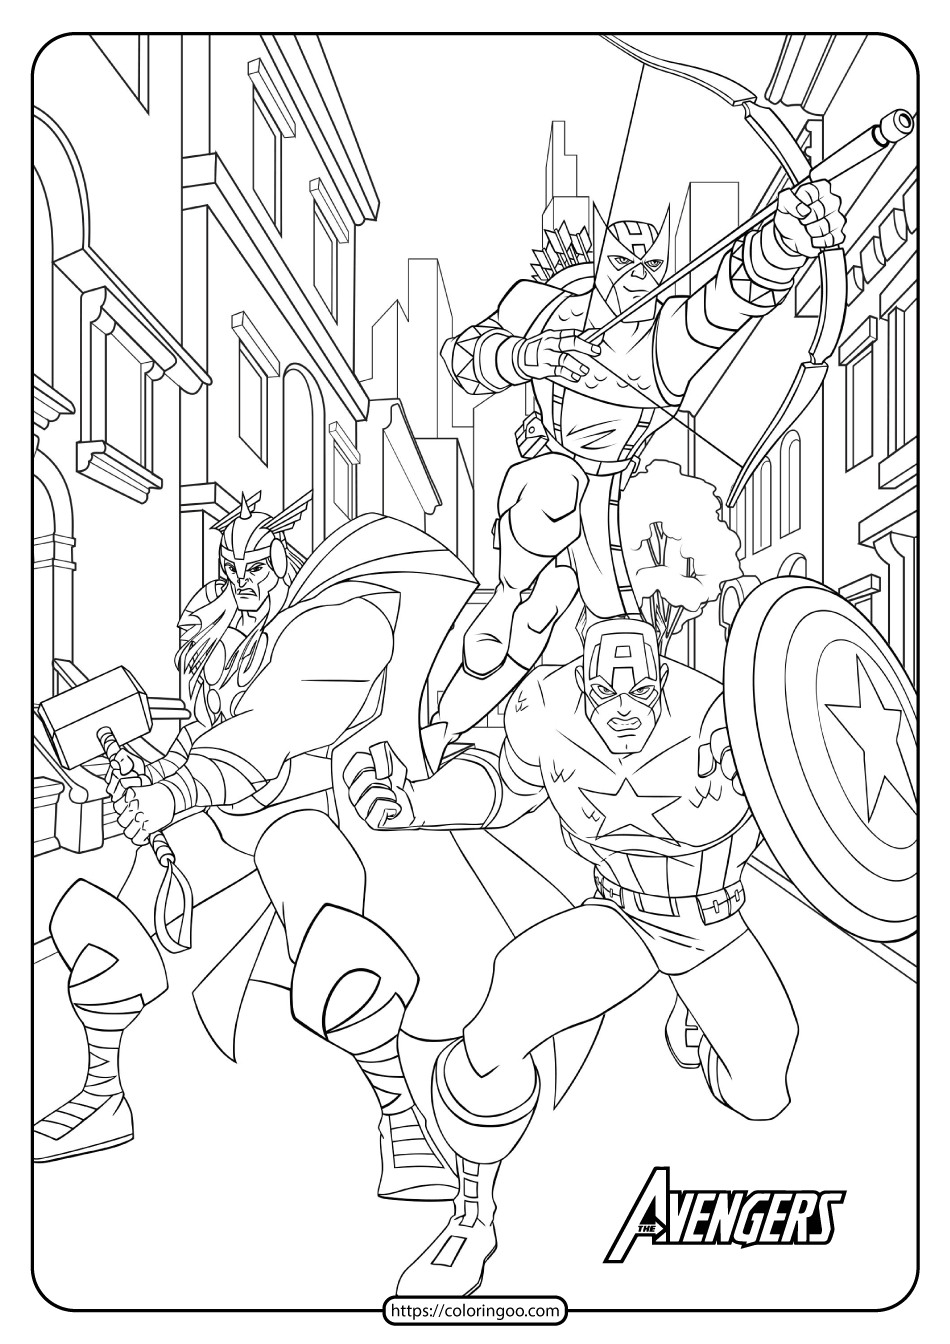 Printable The Avengers Coloring Book and Pages 02